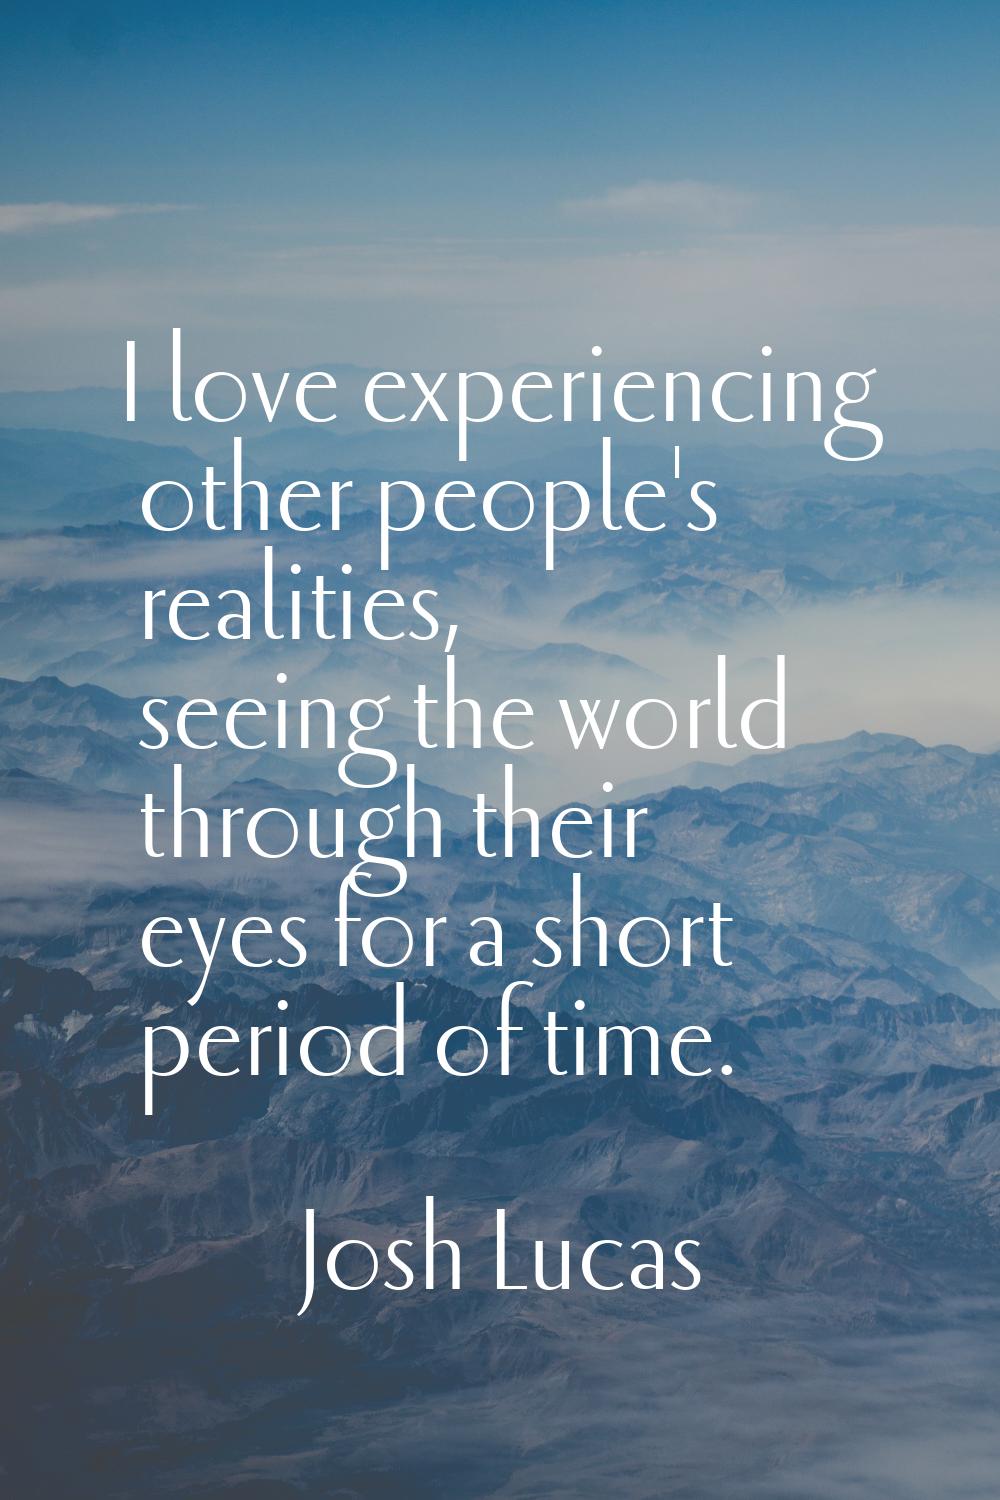 I love experiencing other people's realities, seeing the world through their eyes for a short perio